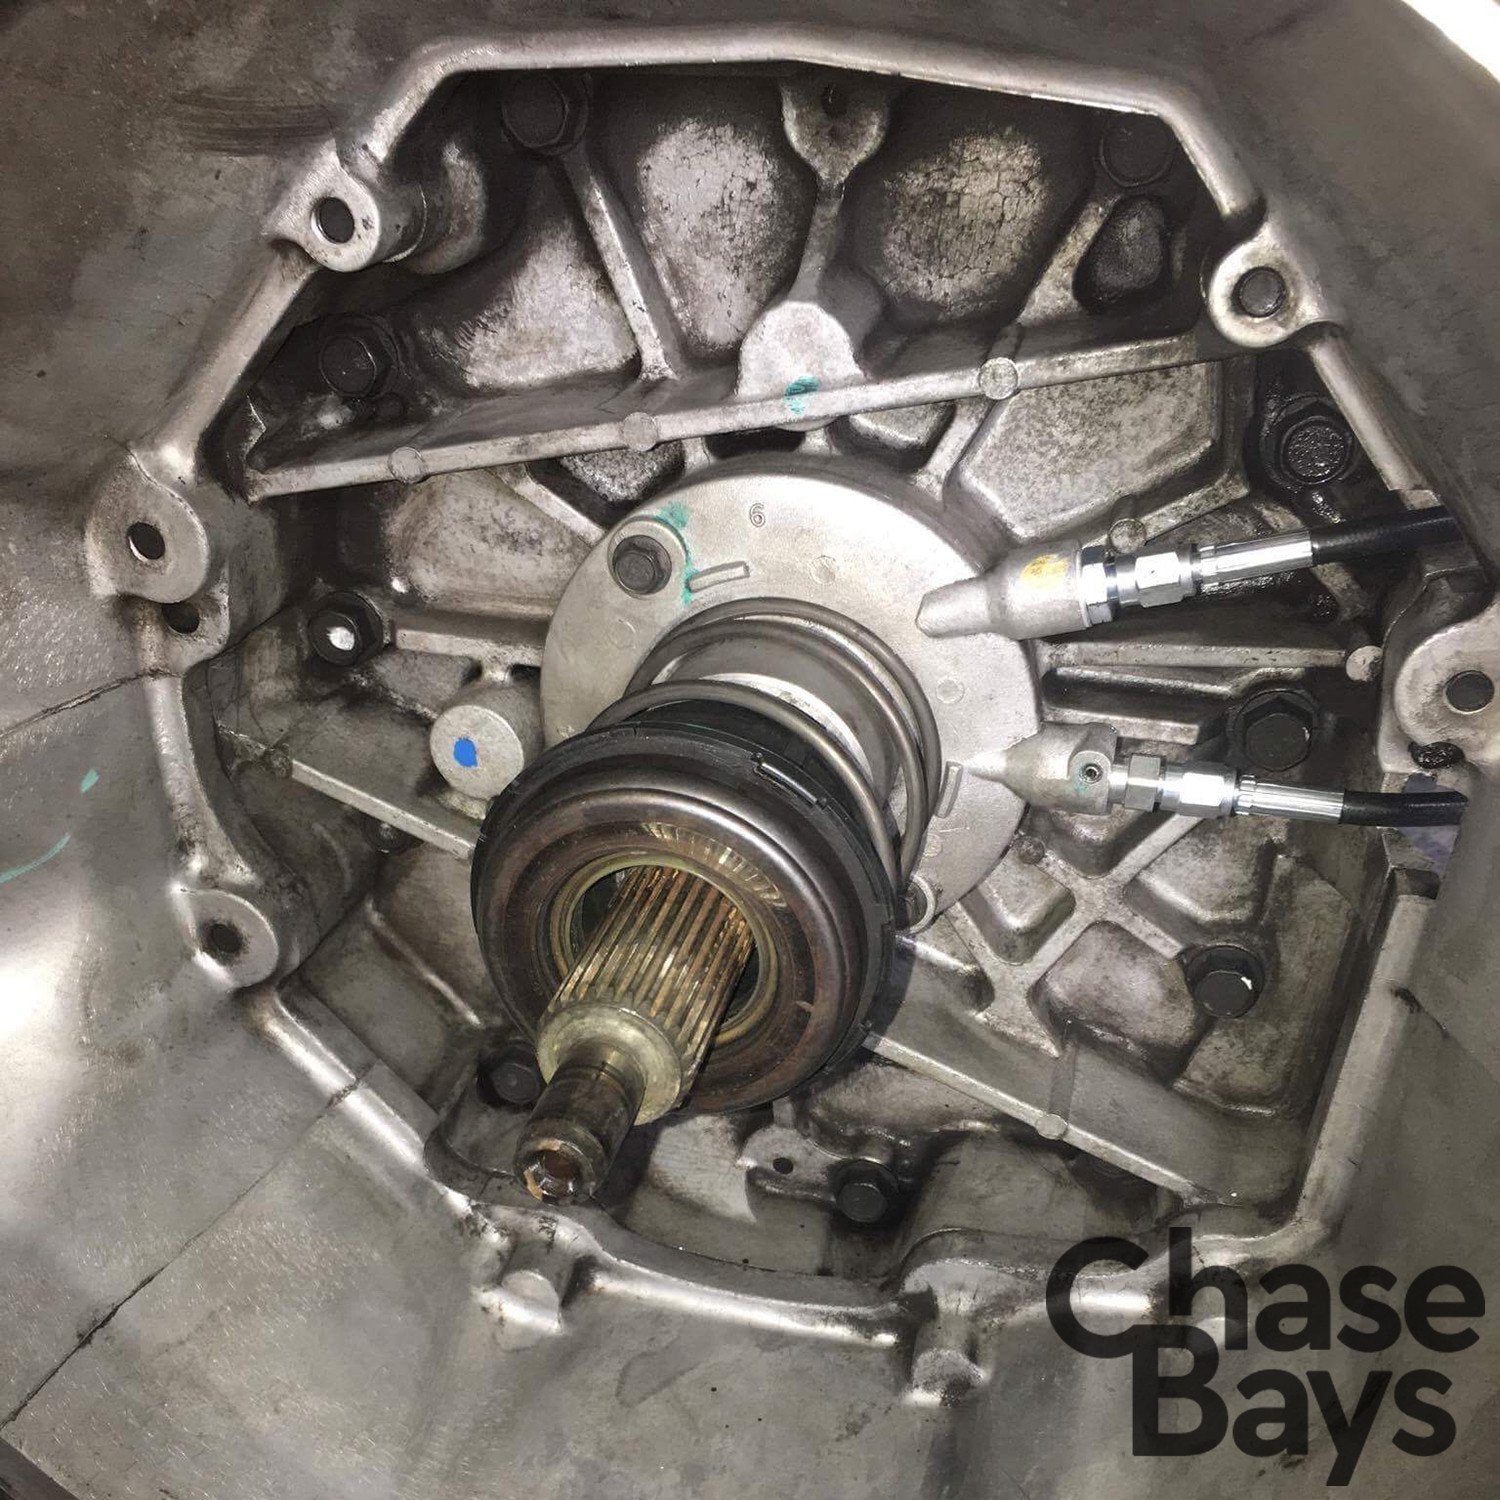 CHASE BAYS BMW E46 clutch line with GM LS T56 TR6060 swap